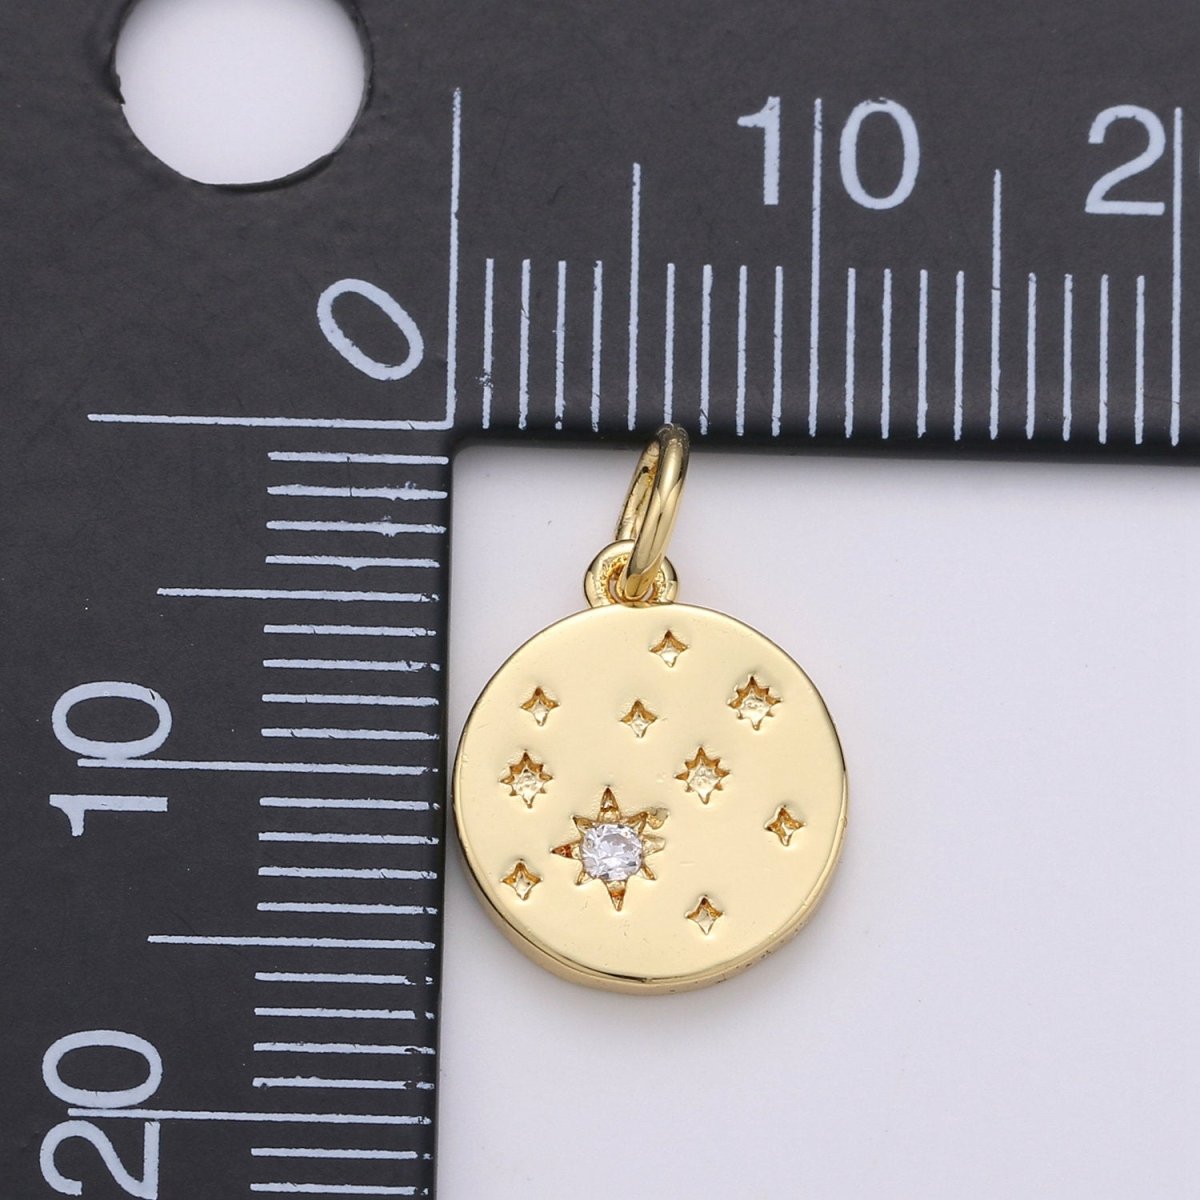 24k Gold Filled Micro Pave CZ Star Pendant Charm, Cubic Galaxy Micro Pave CZ Pendant Charm, Gold Filled Pendant, For Celestial Jewelry D-394 - DLUXCA